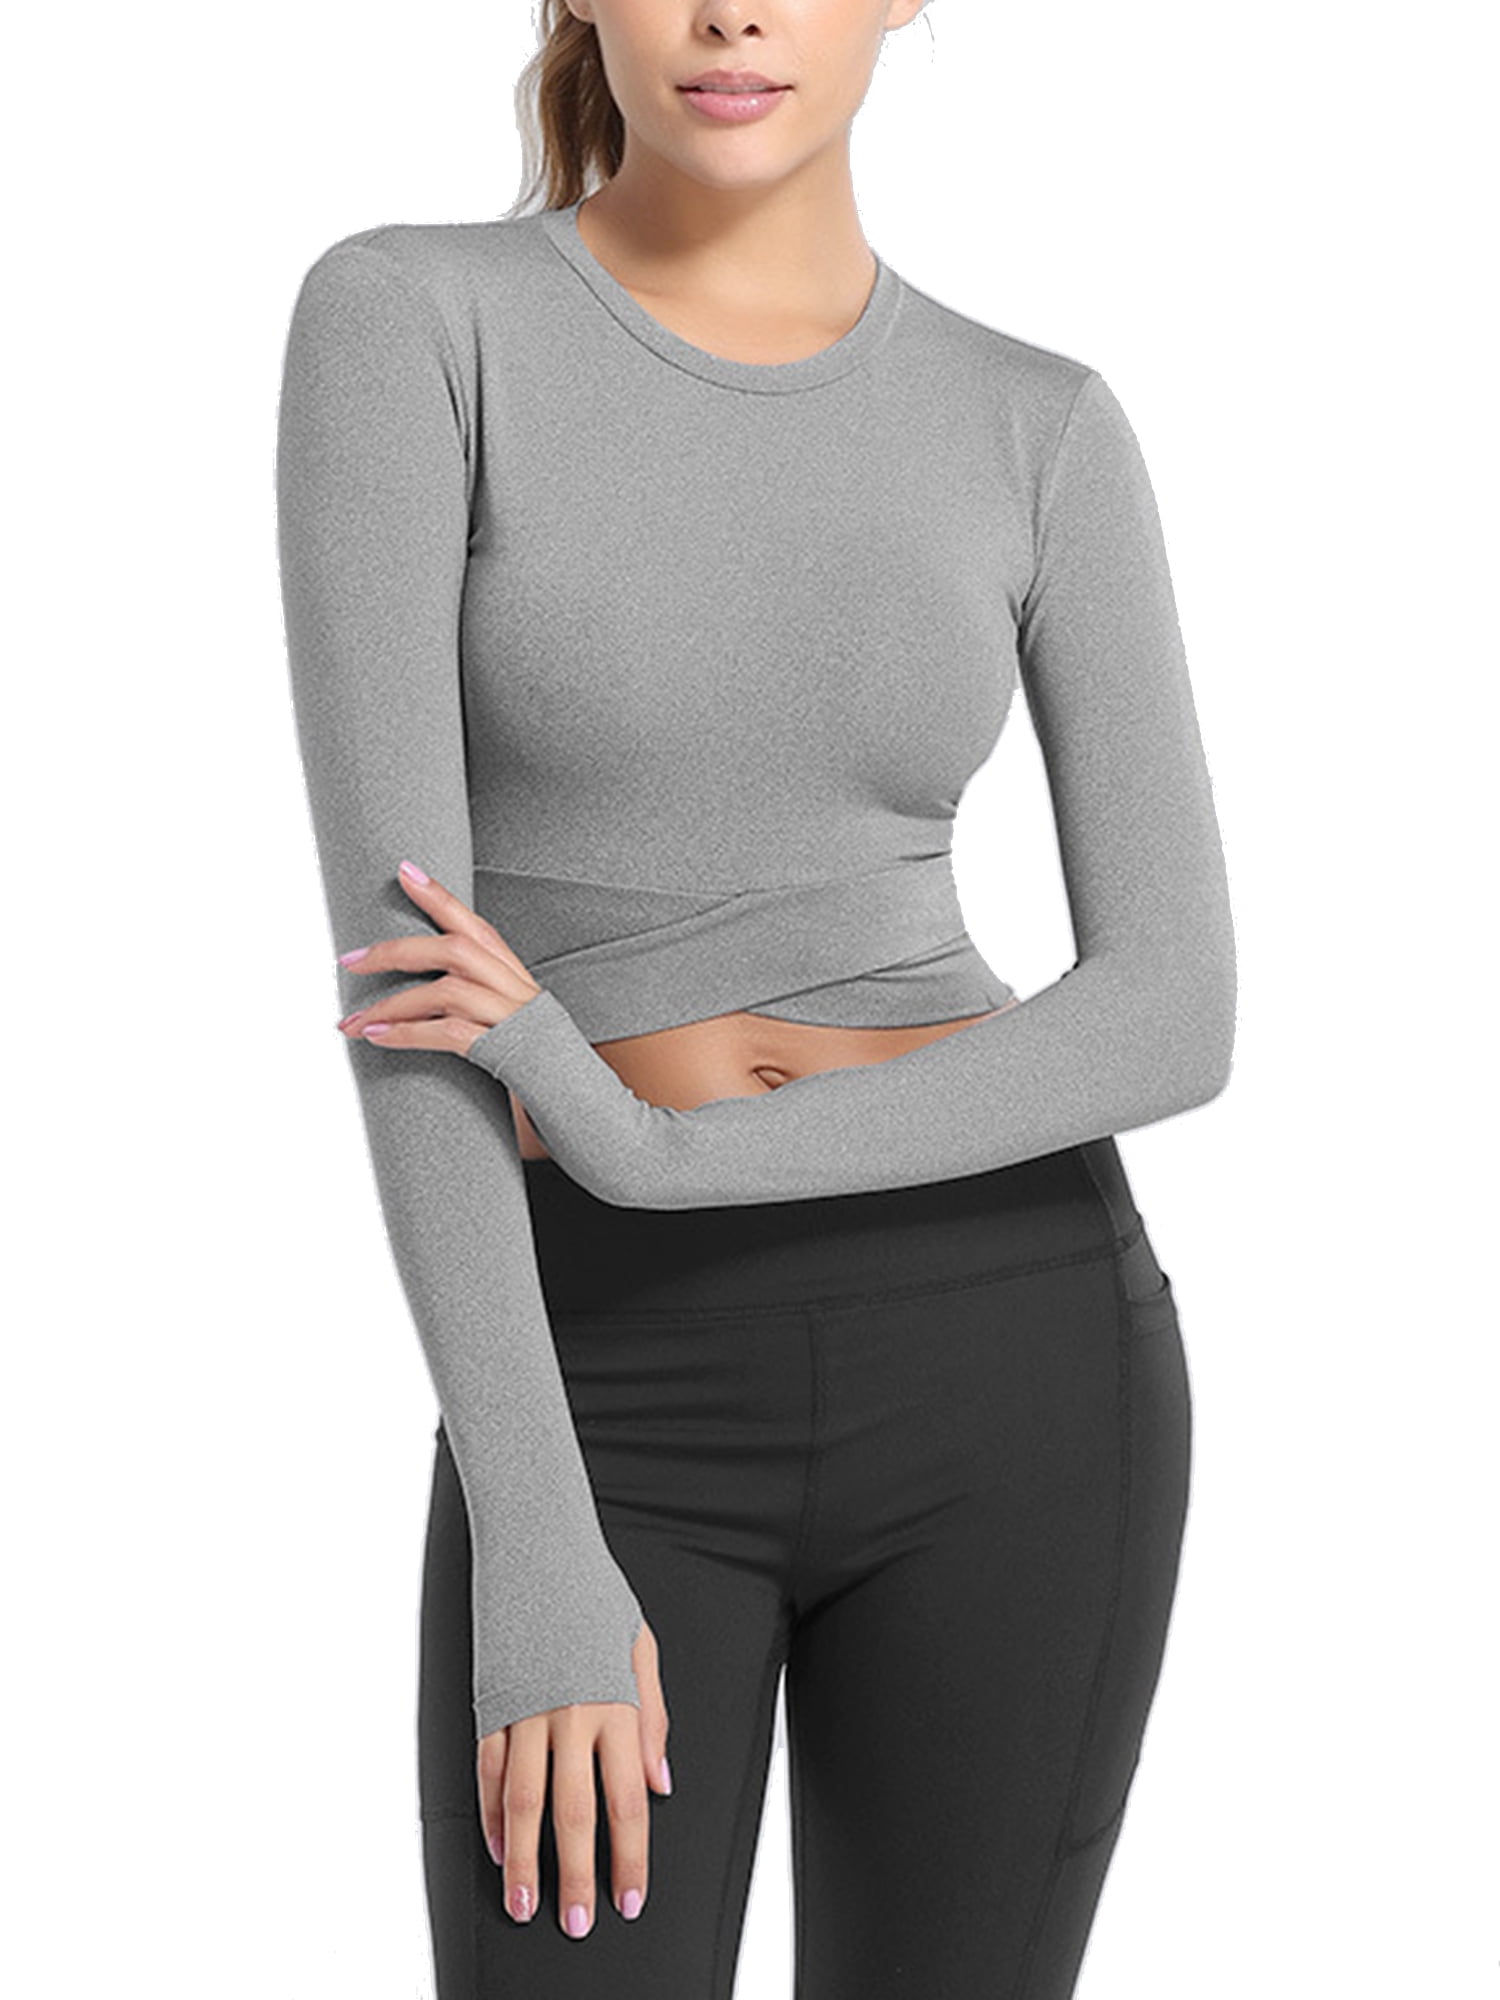 Uhndy Women's Workout Shirts Crop Top Workout Gym Exercise Clothes for  Girls Yoga Shirts with Thumb Holes Sexy Shirts Sportswear Athleticwear  Loungewear Long Sleeve Gray,XL 